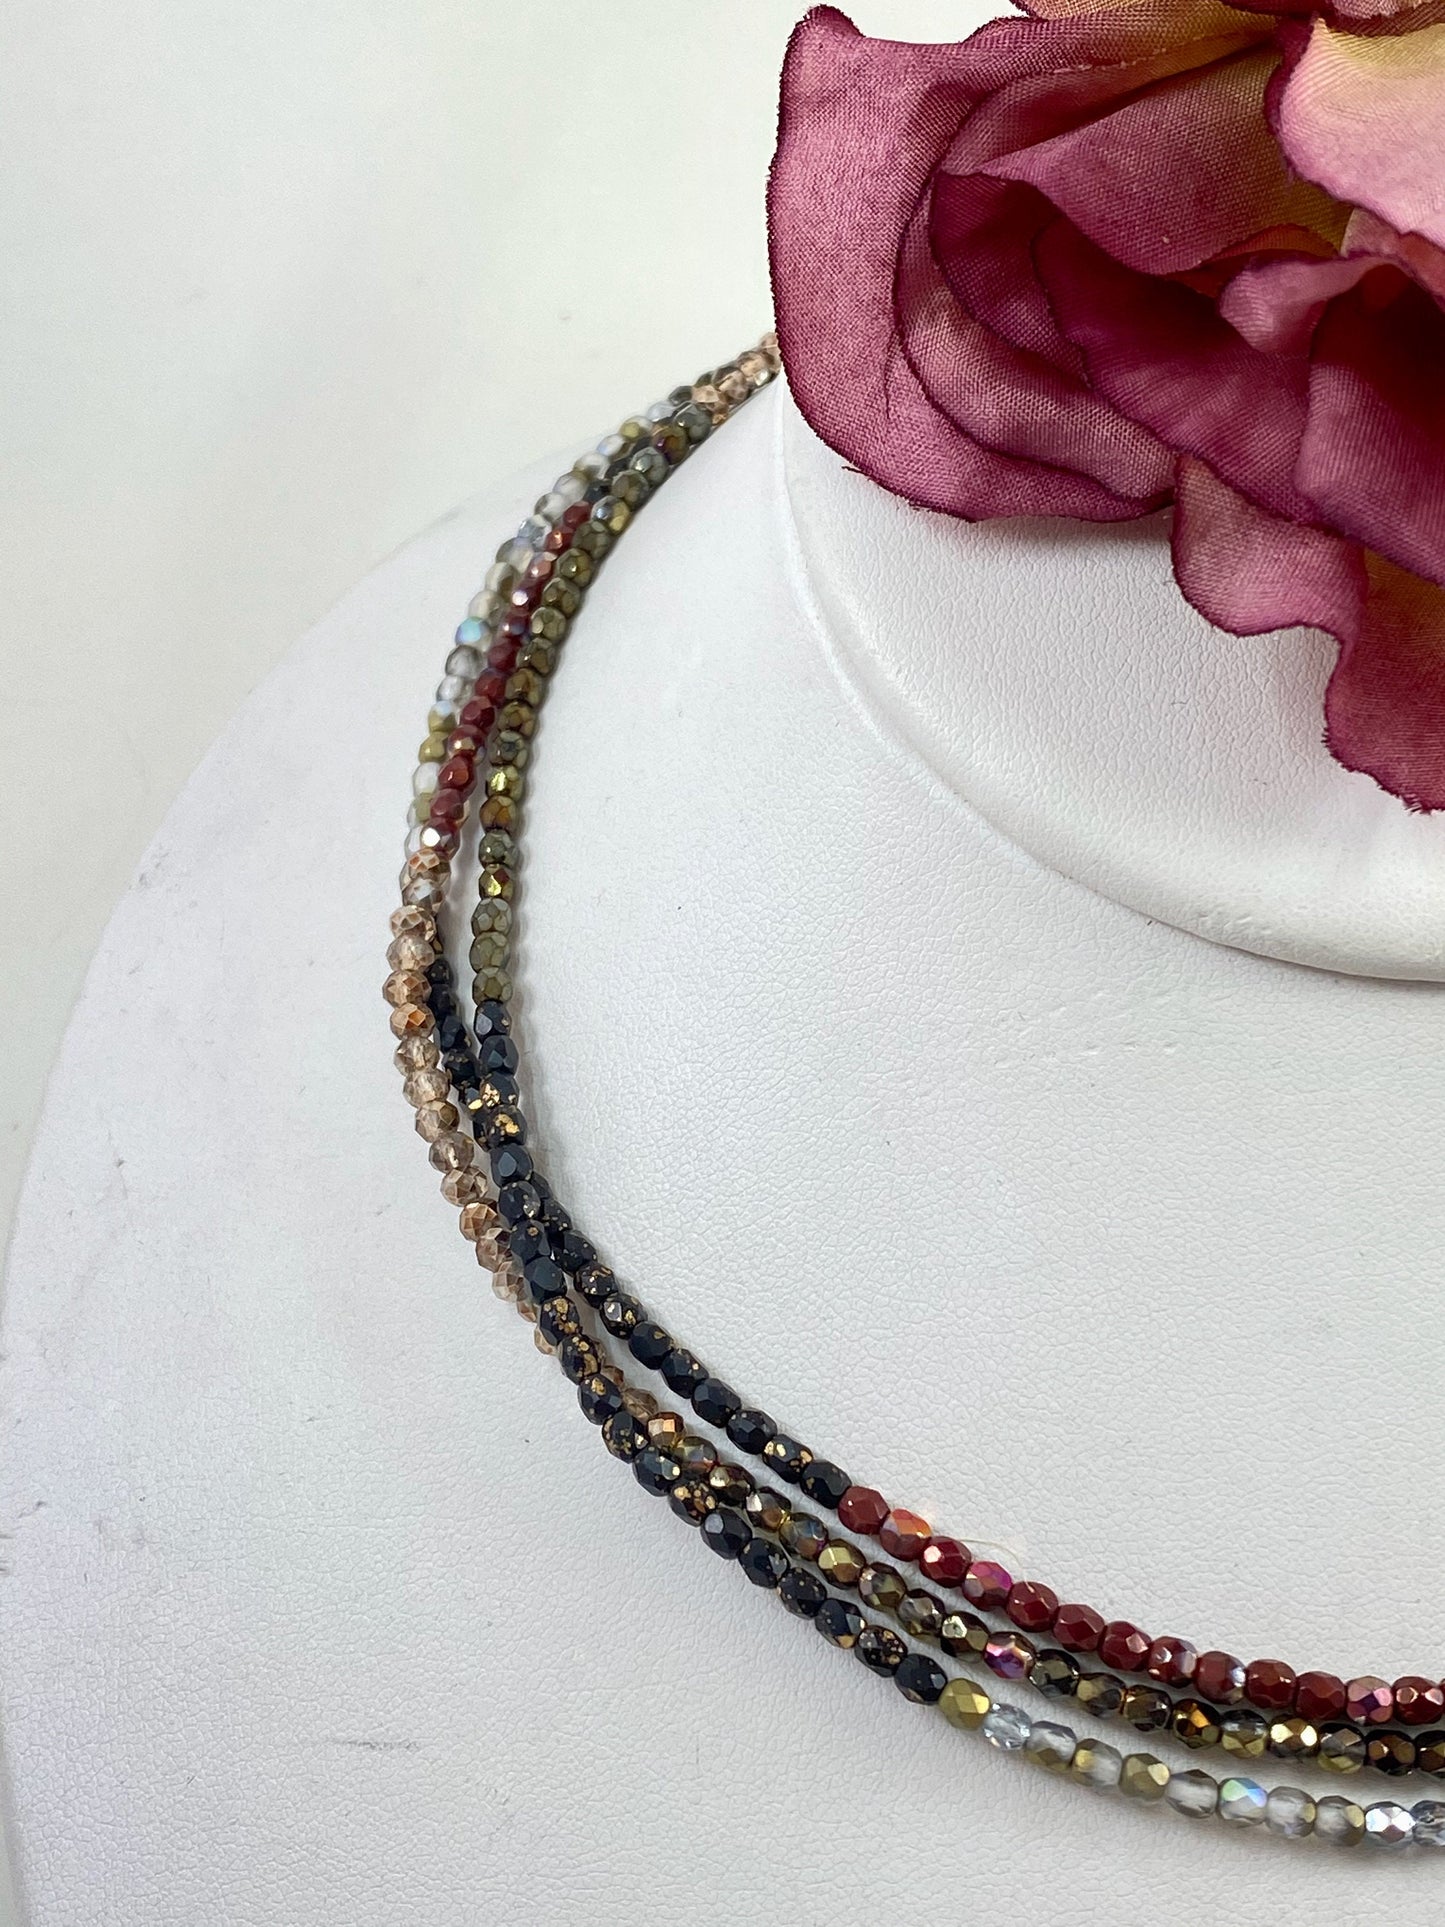 Stunning crystal necklace, with multi colors and designed to wear long or short. Finished with a quality sterling silver magnetic clasp.